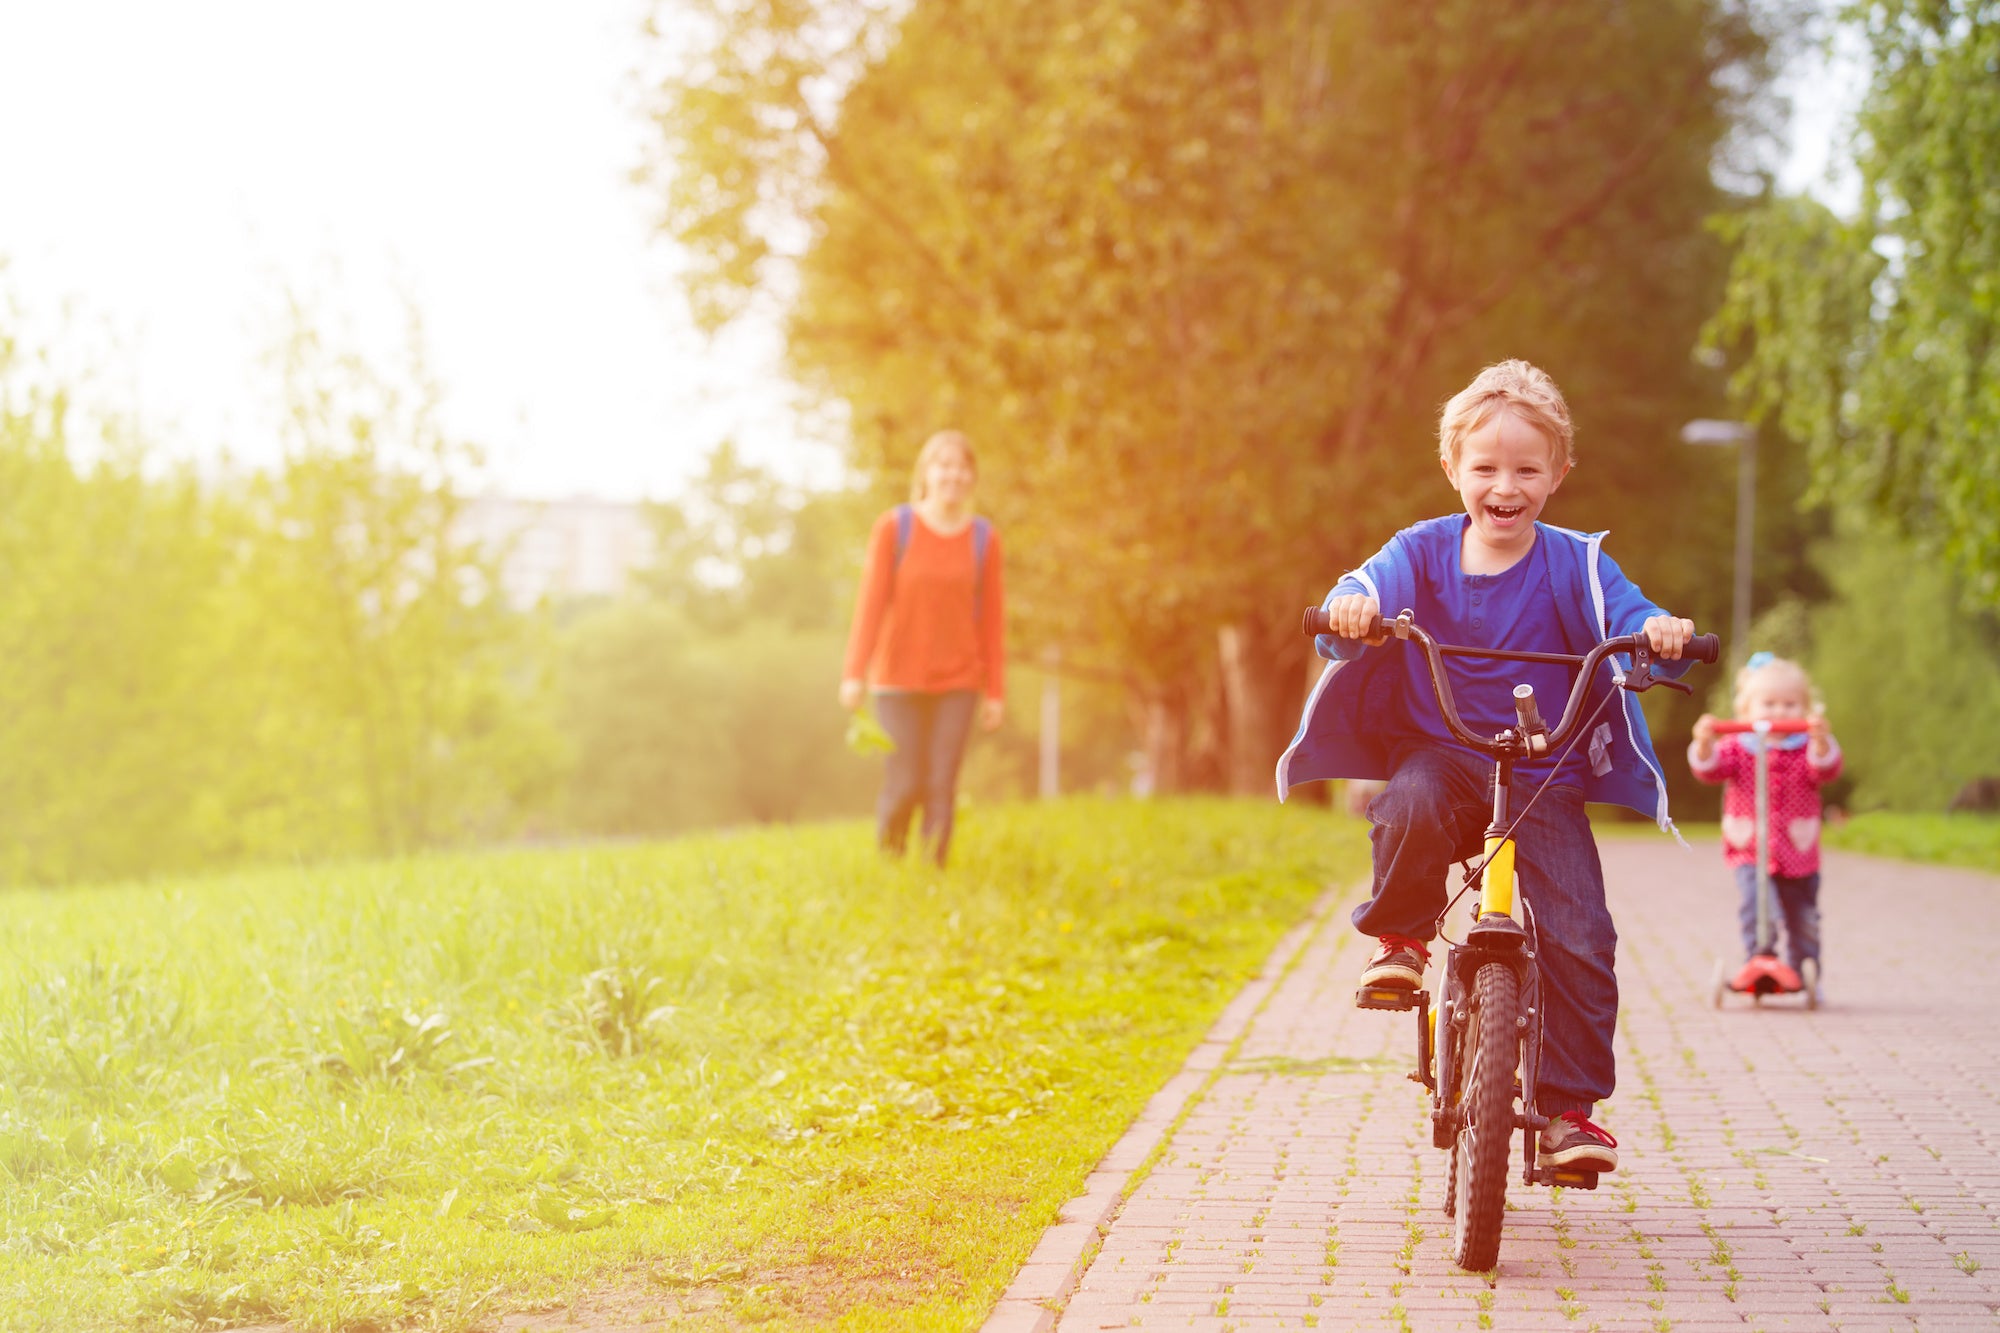 How To Teach A Child To Ride A Bike Without Training Wheels